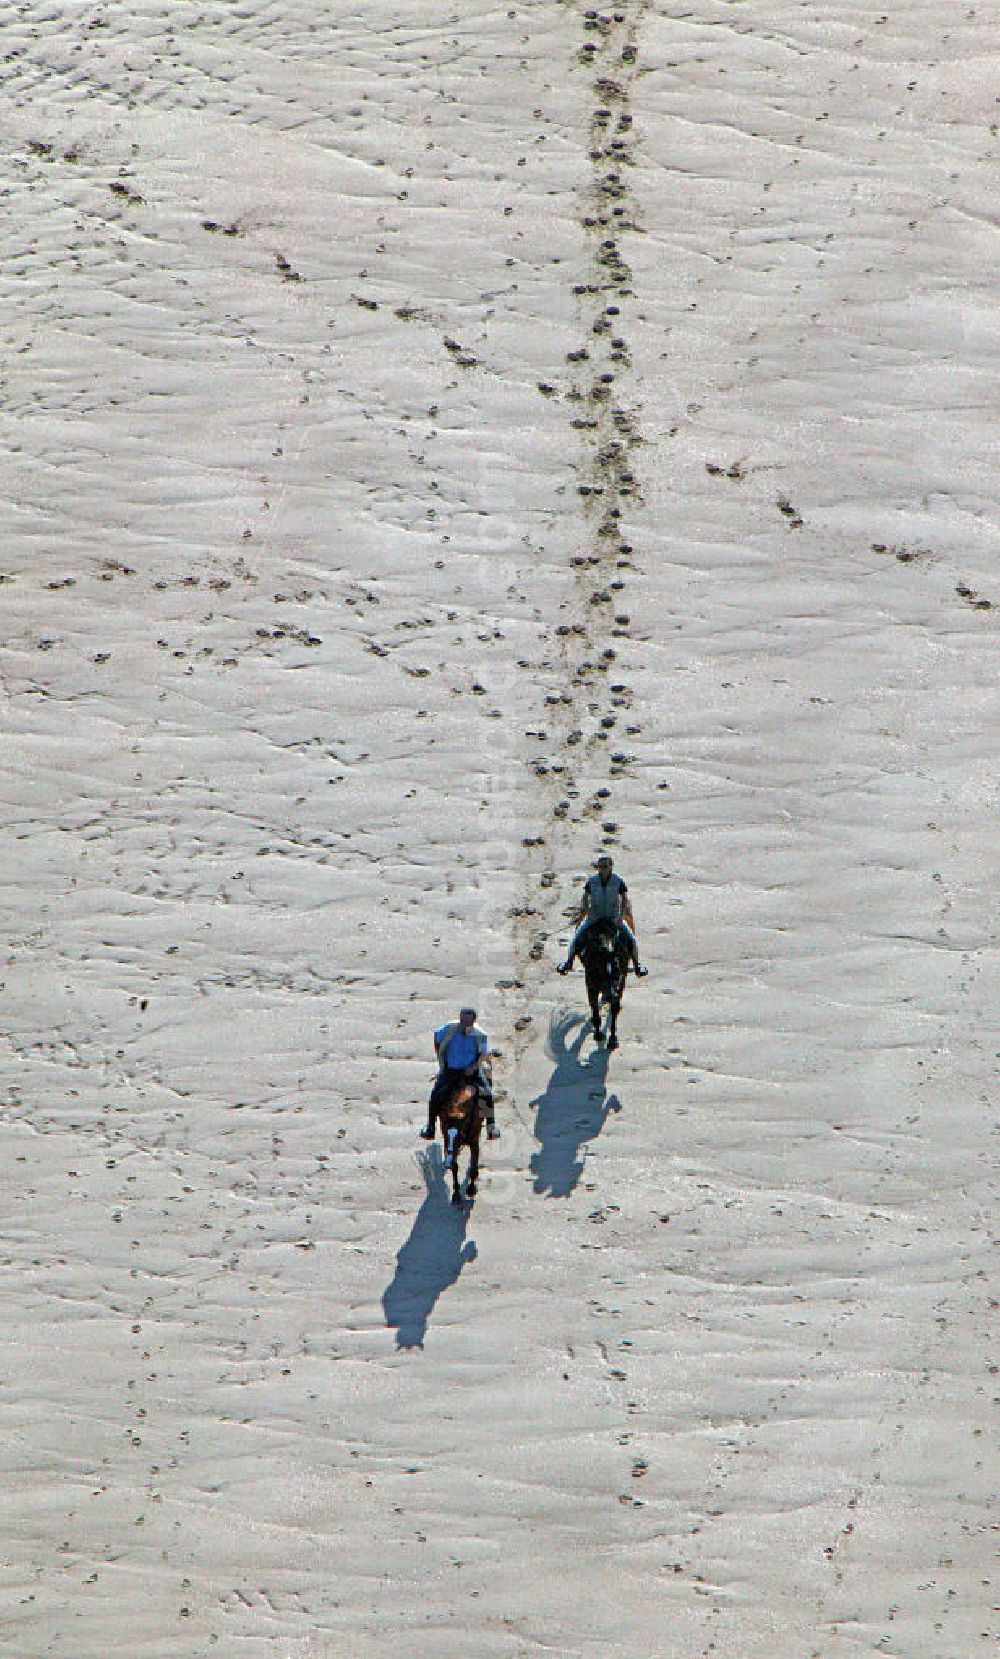 Aerial photograph Norderney - Blick auf Reiter am Strand von Norderney. View of riders on the beach of Norderney.